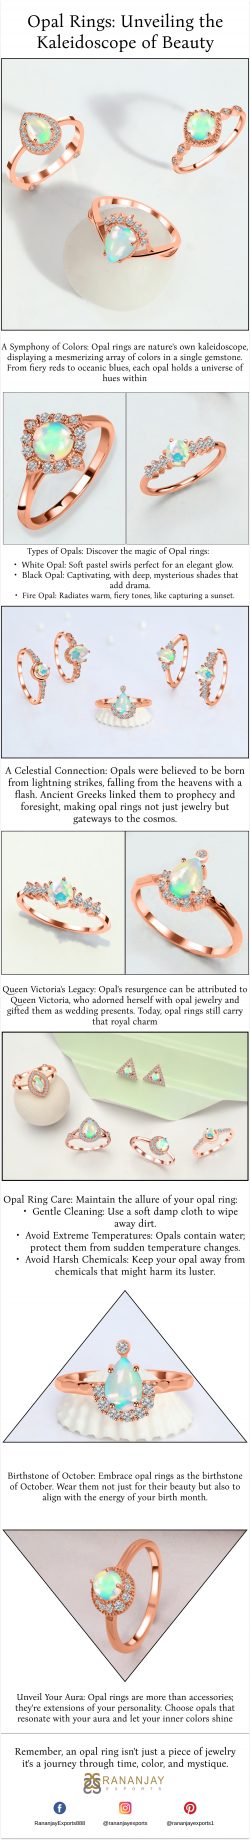 Opal Rings: Unveiling the Kaleidoscope of Beauty